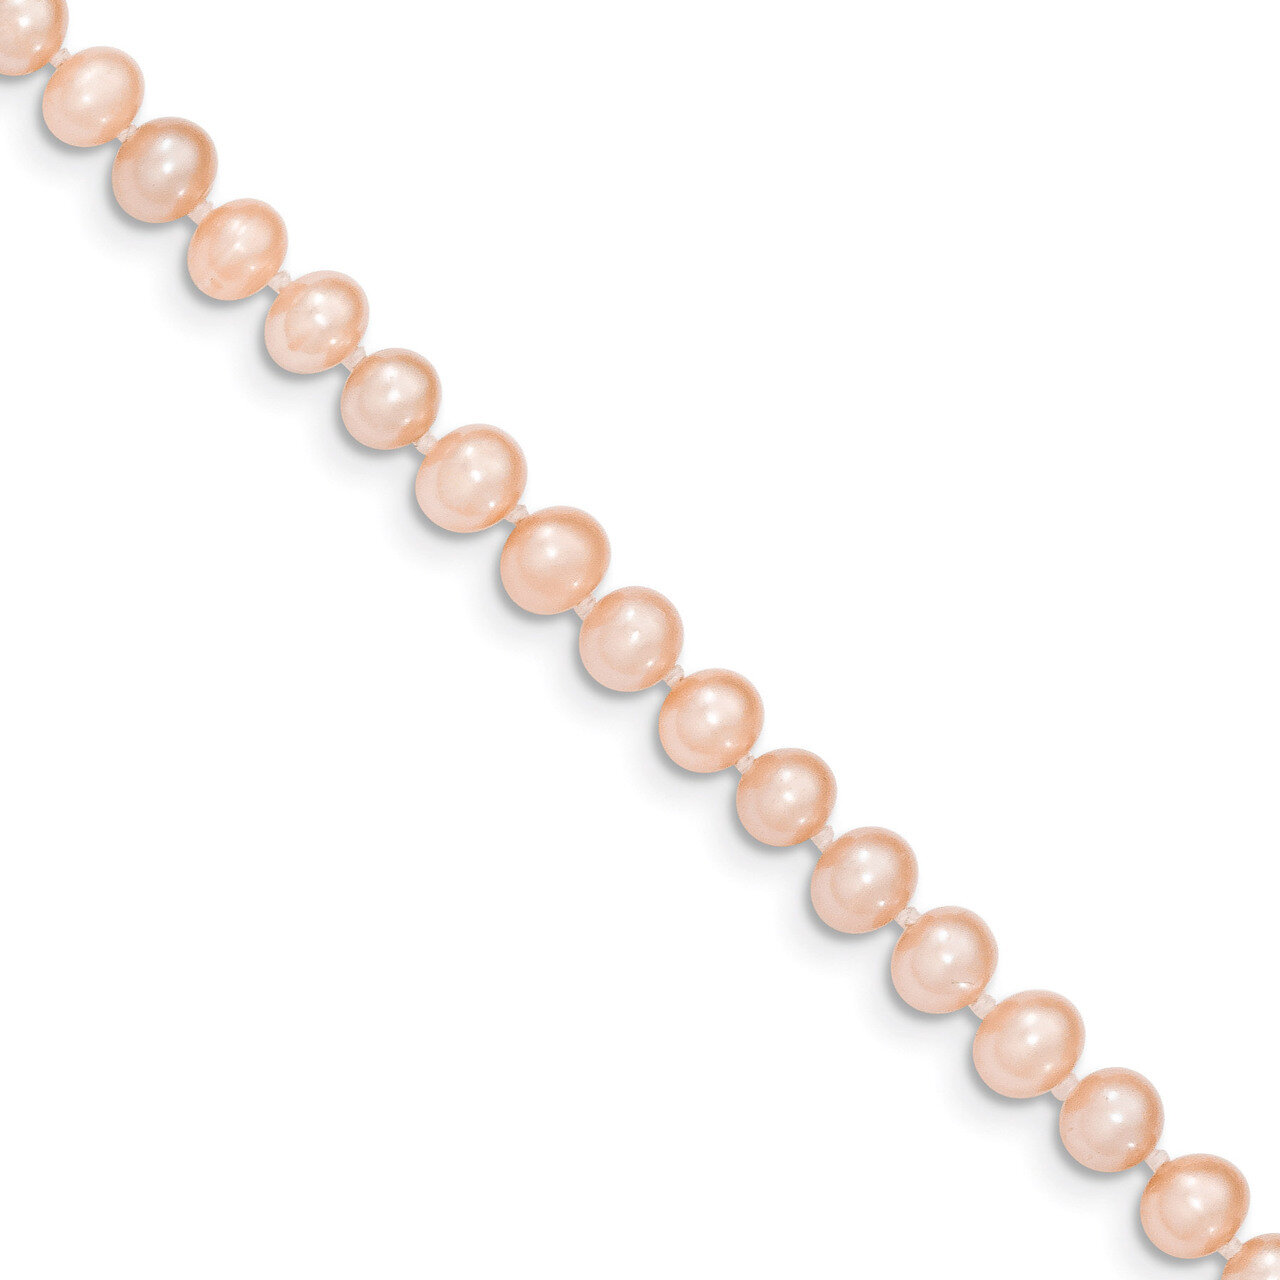 5-6mm Pink Cultured Near Round Pearl Necklace 18 Inch 14k Gold PPN050-18